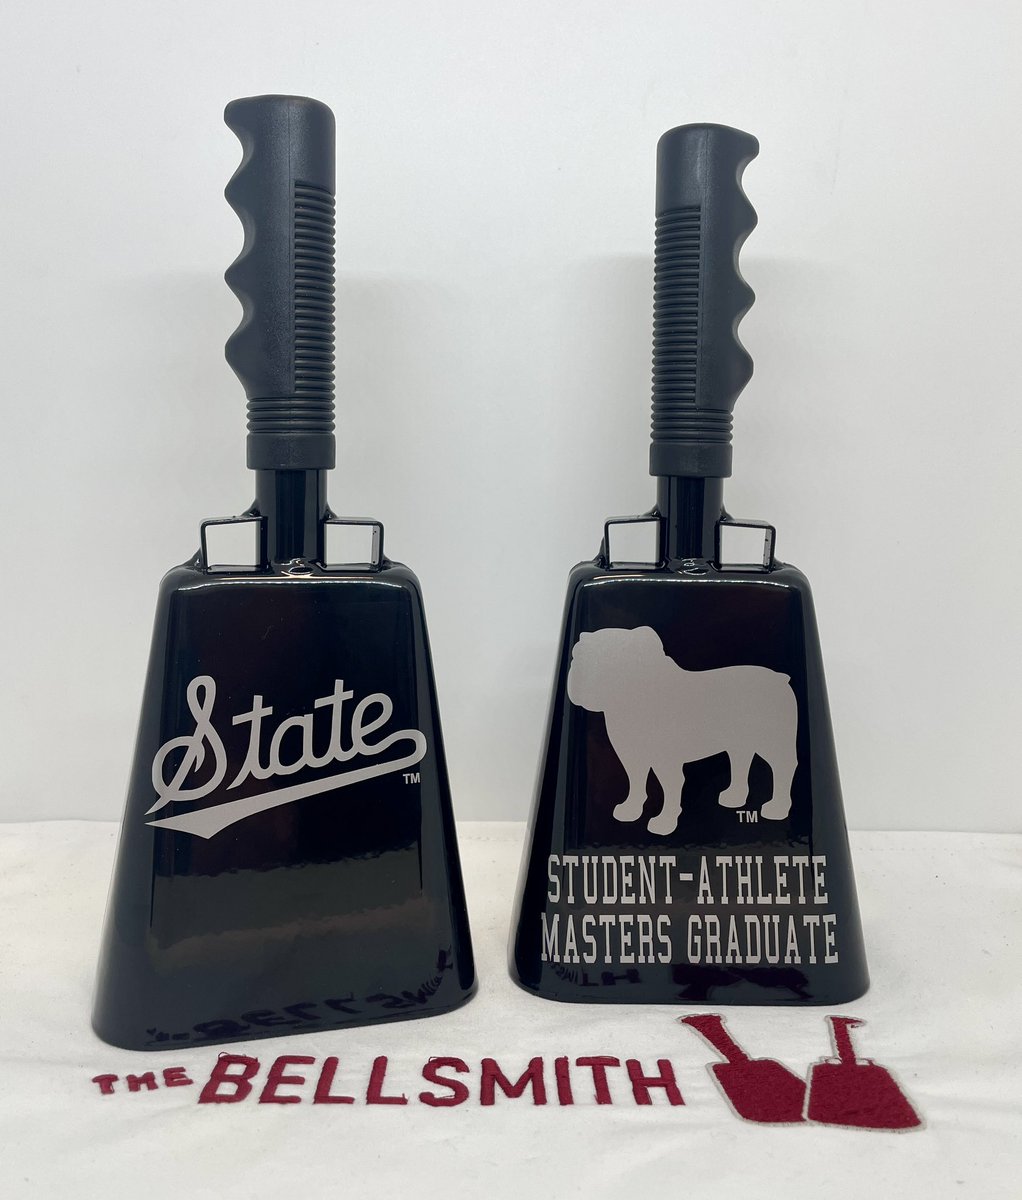 Congratulations to all the @HailState graduates!! Not everybody gets to leave college with an awesome bell. And a diploma - that’s important too. #HailState #Cowbells #Bellsmith